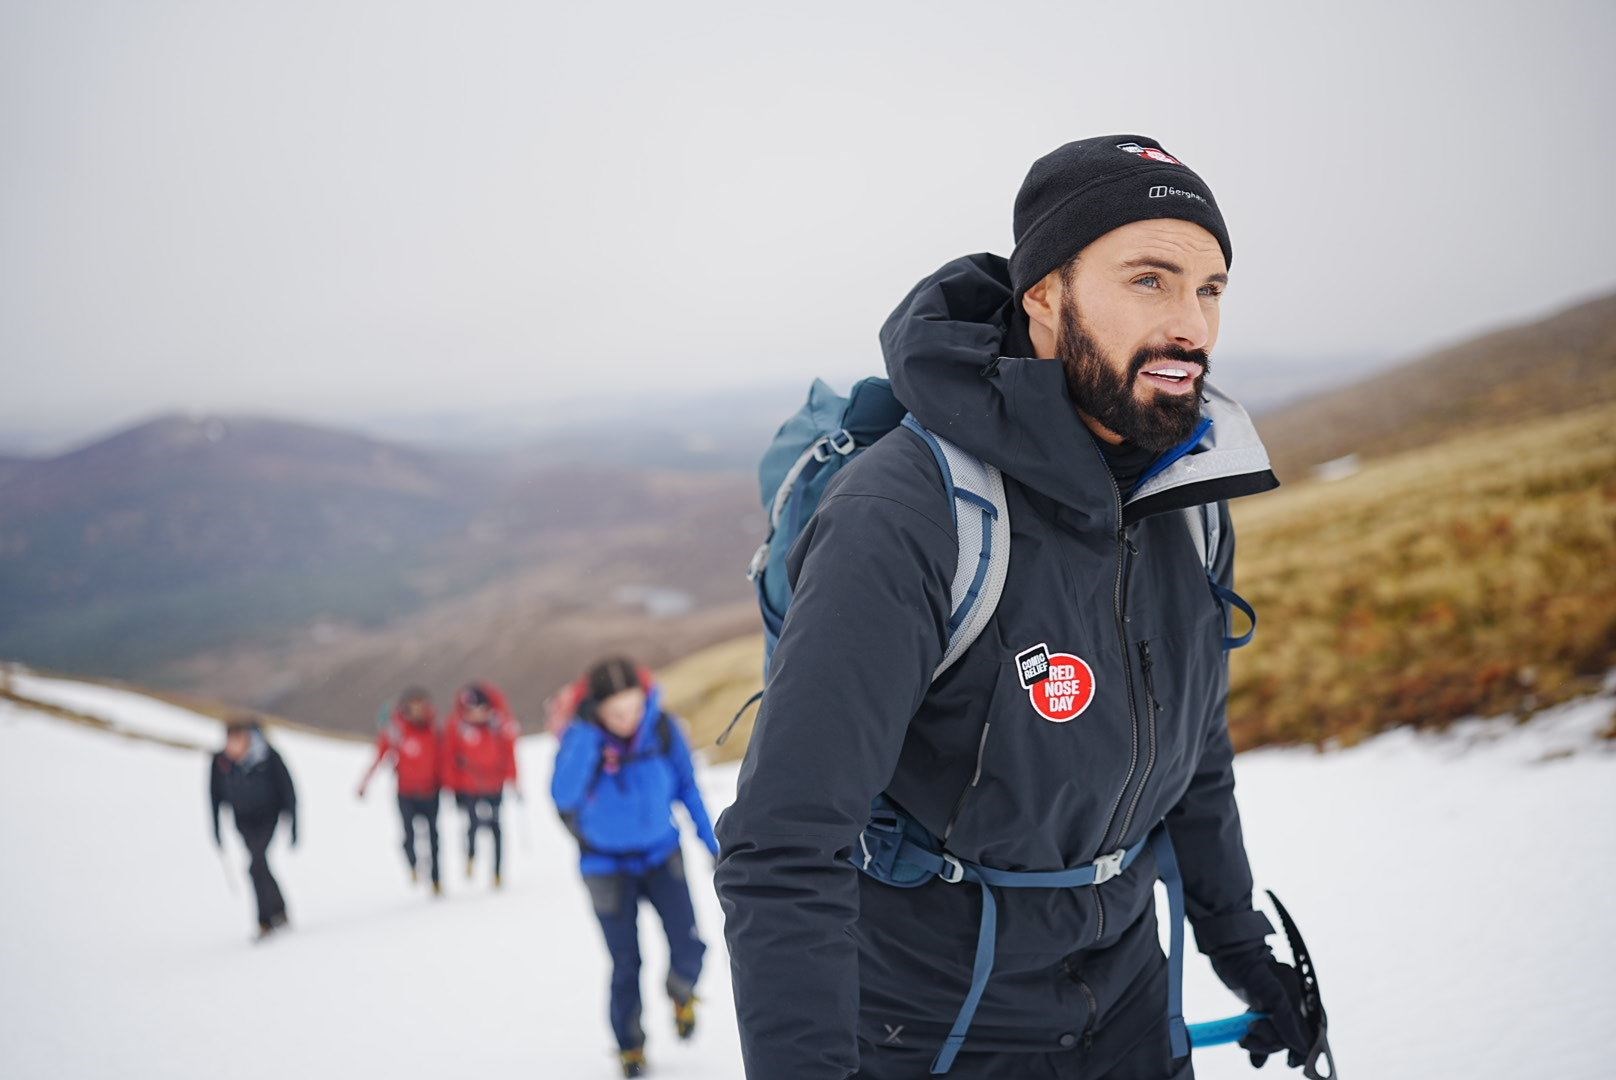 Emma Willis, Oti Mabuse and Rylan are seen here during day 4 of the Red Nose Day challenge in the Scottish Highlands: Photo by Hamish Frost/Comic Relief.